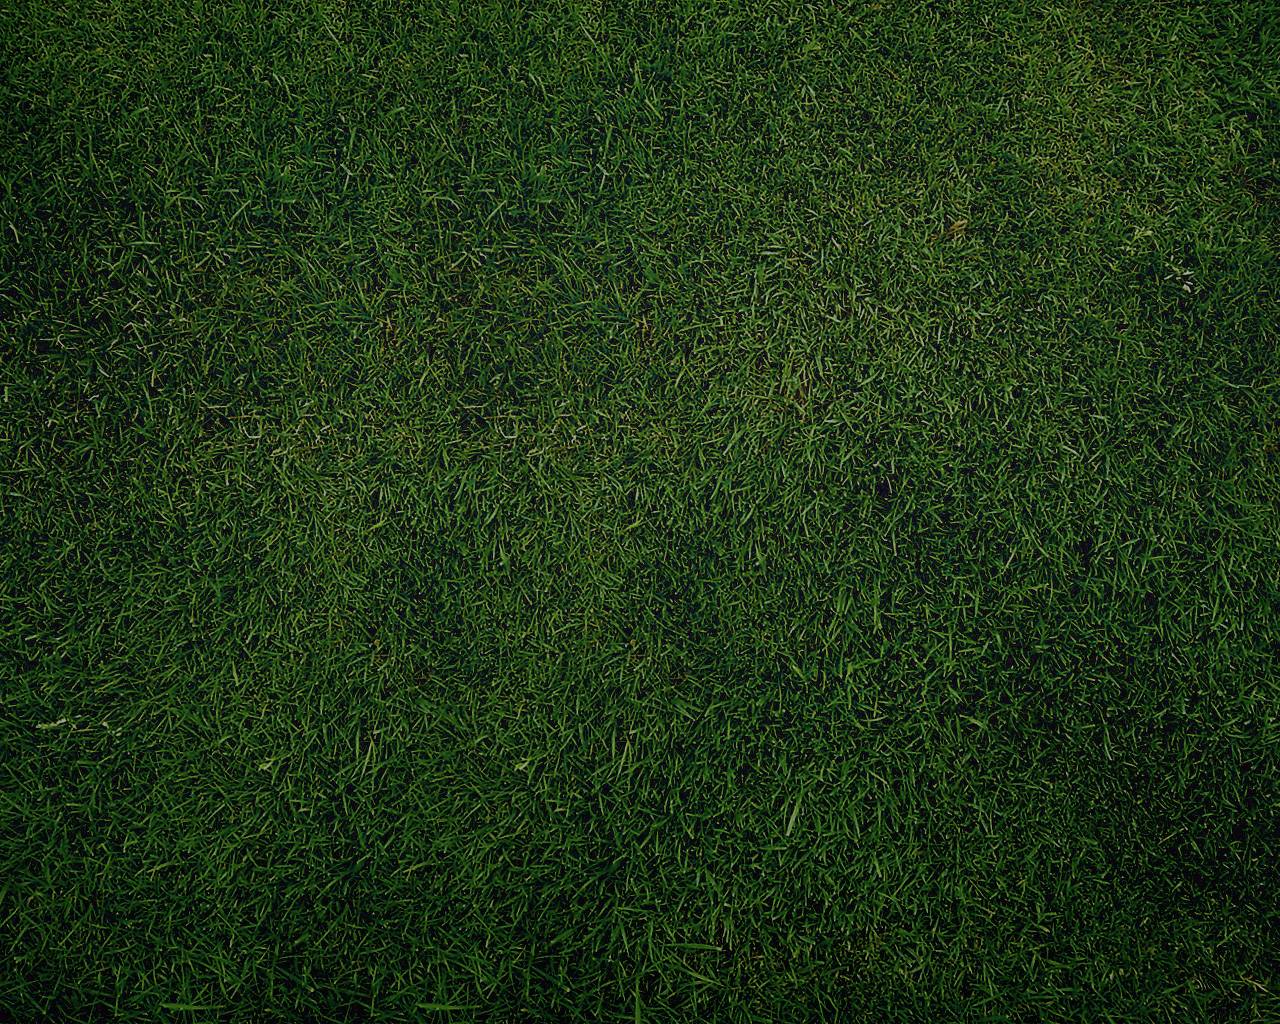 Hd Grass Wallpaper and Background